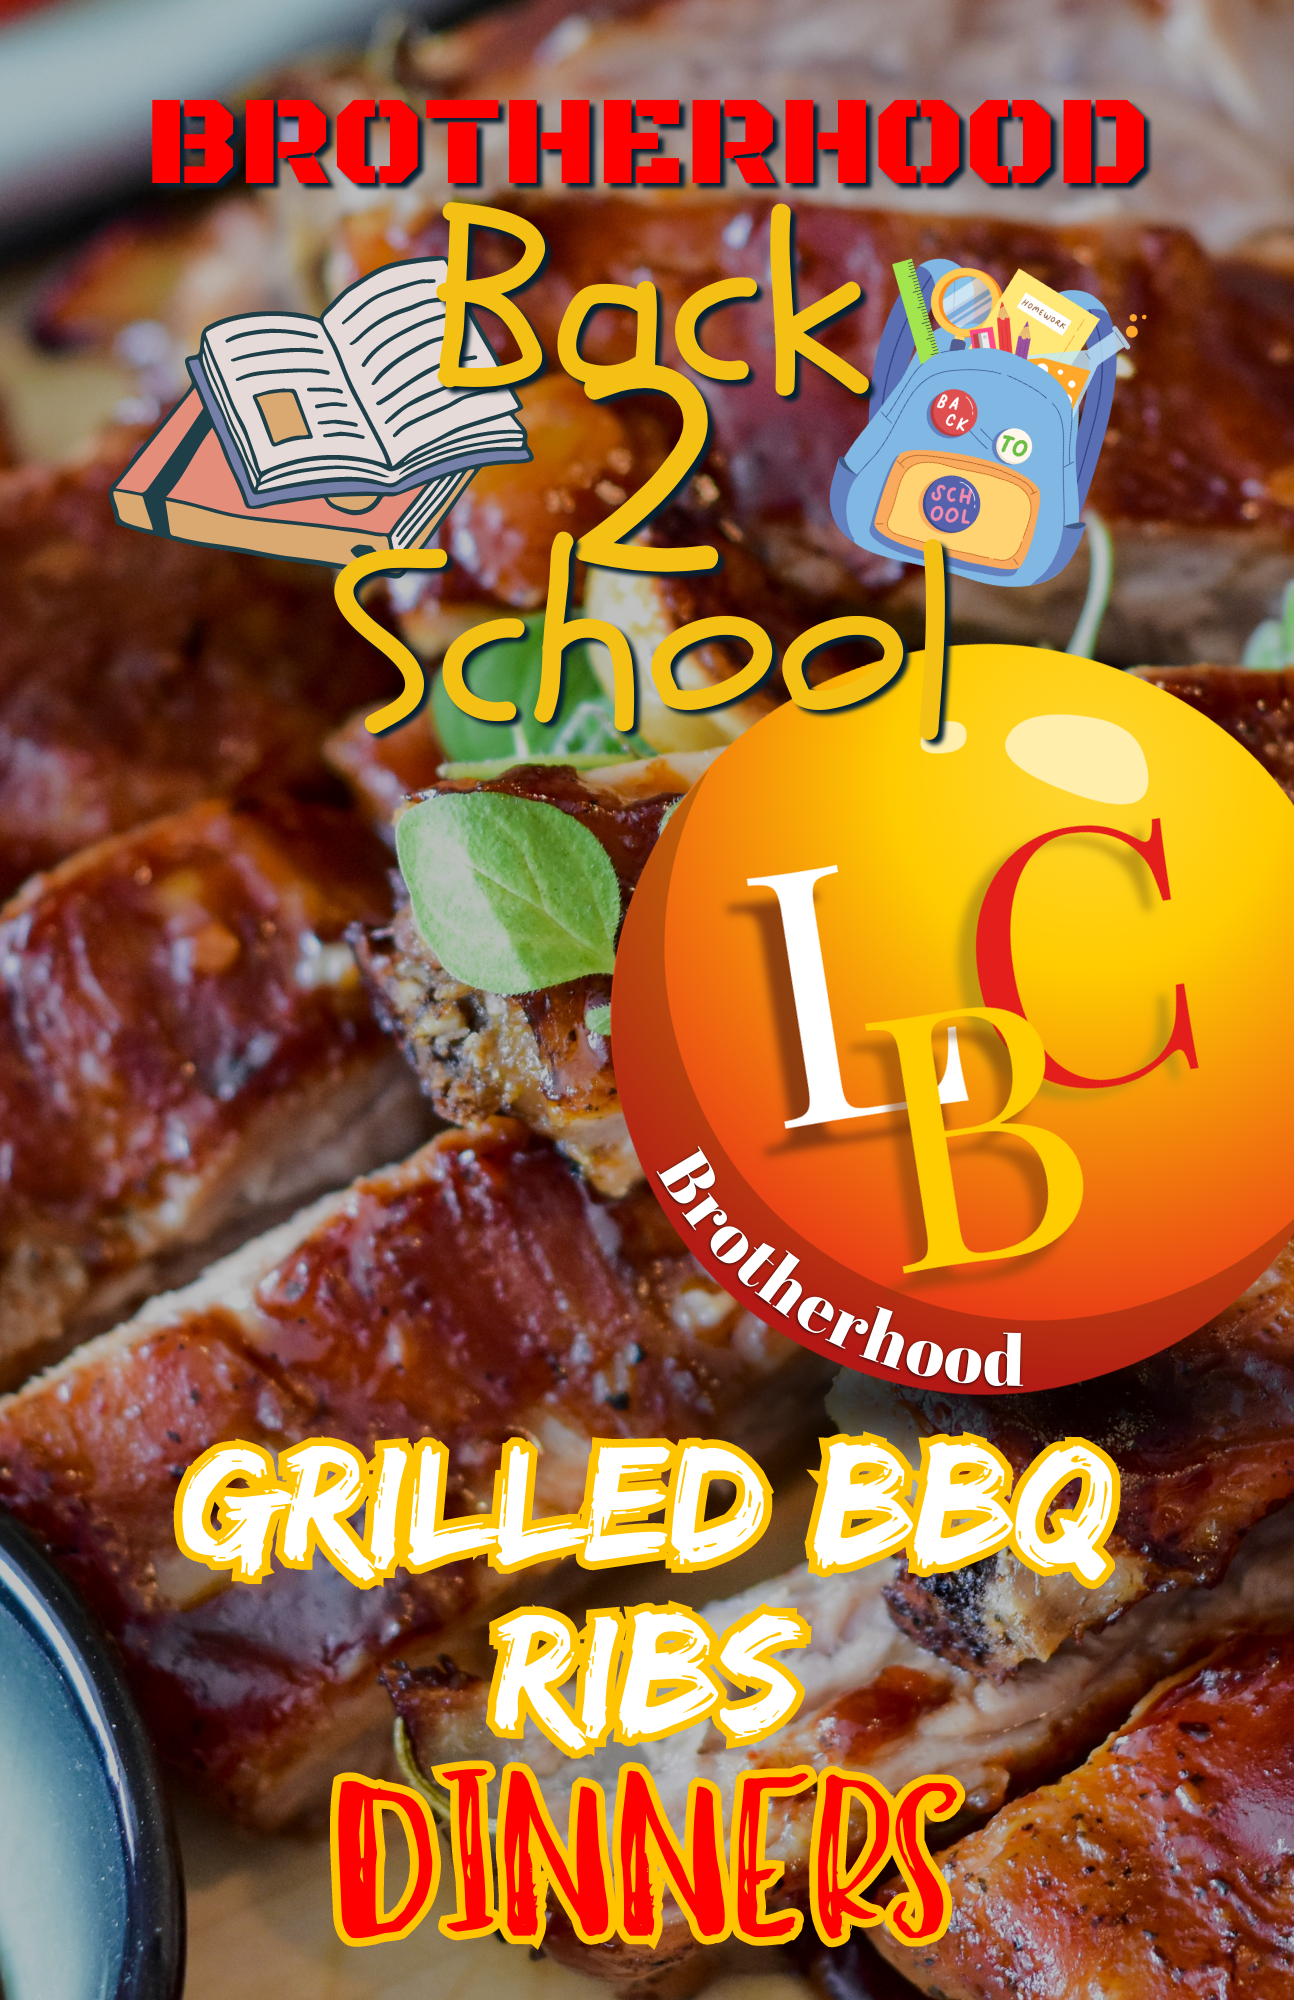 BackToSchool_GrilledRibs_Product Image.png